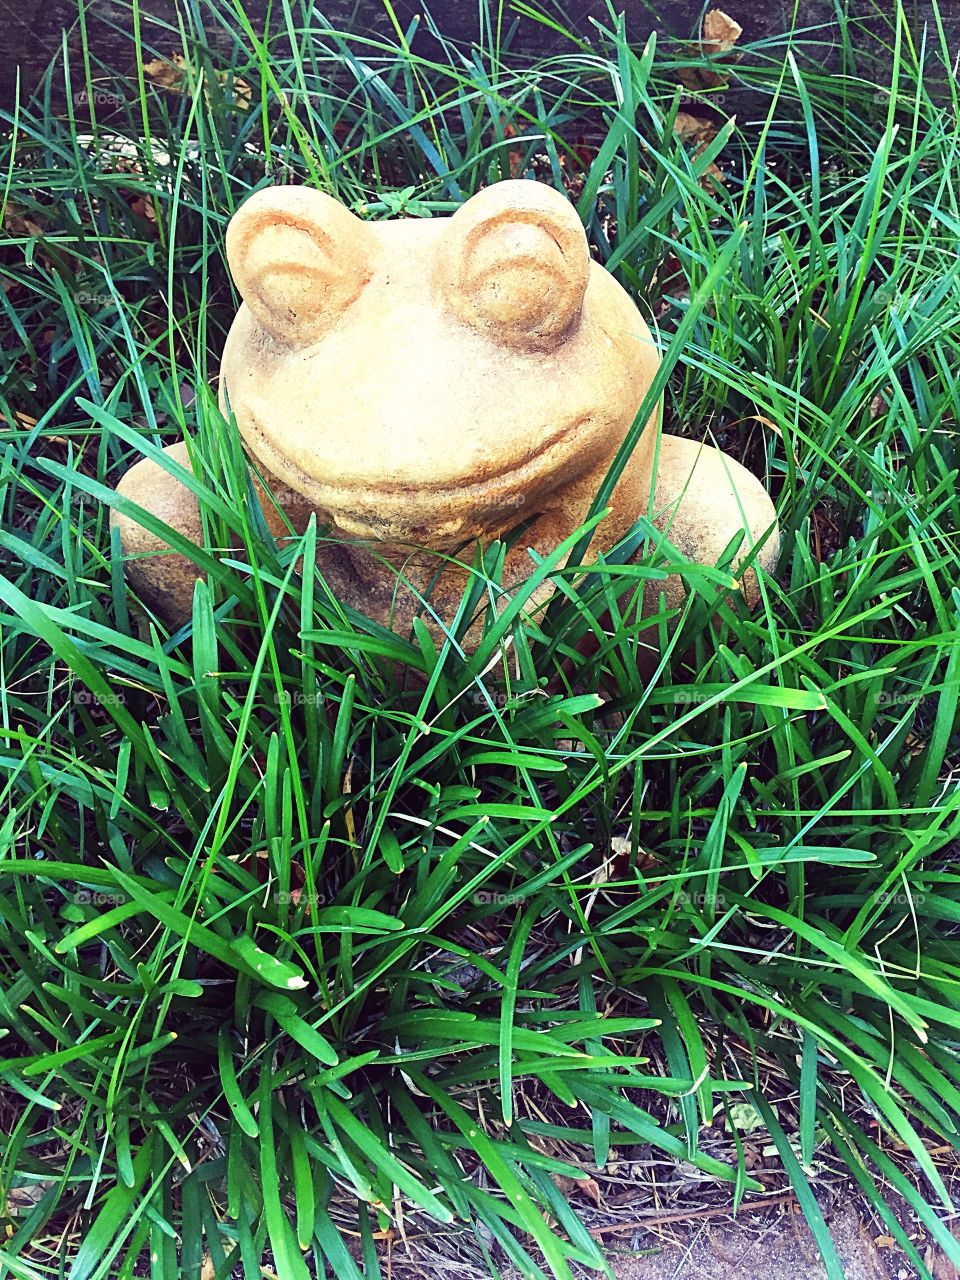 The toad in the road;